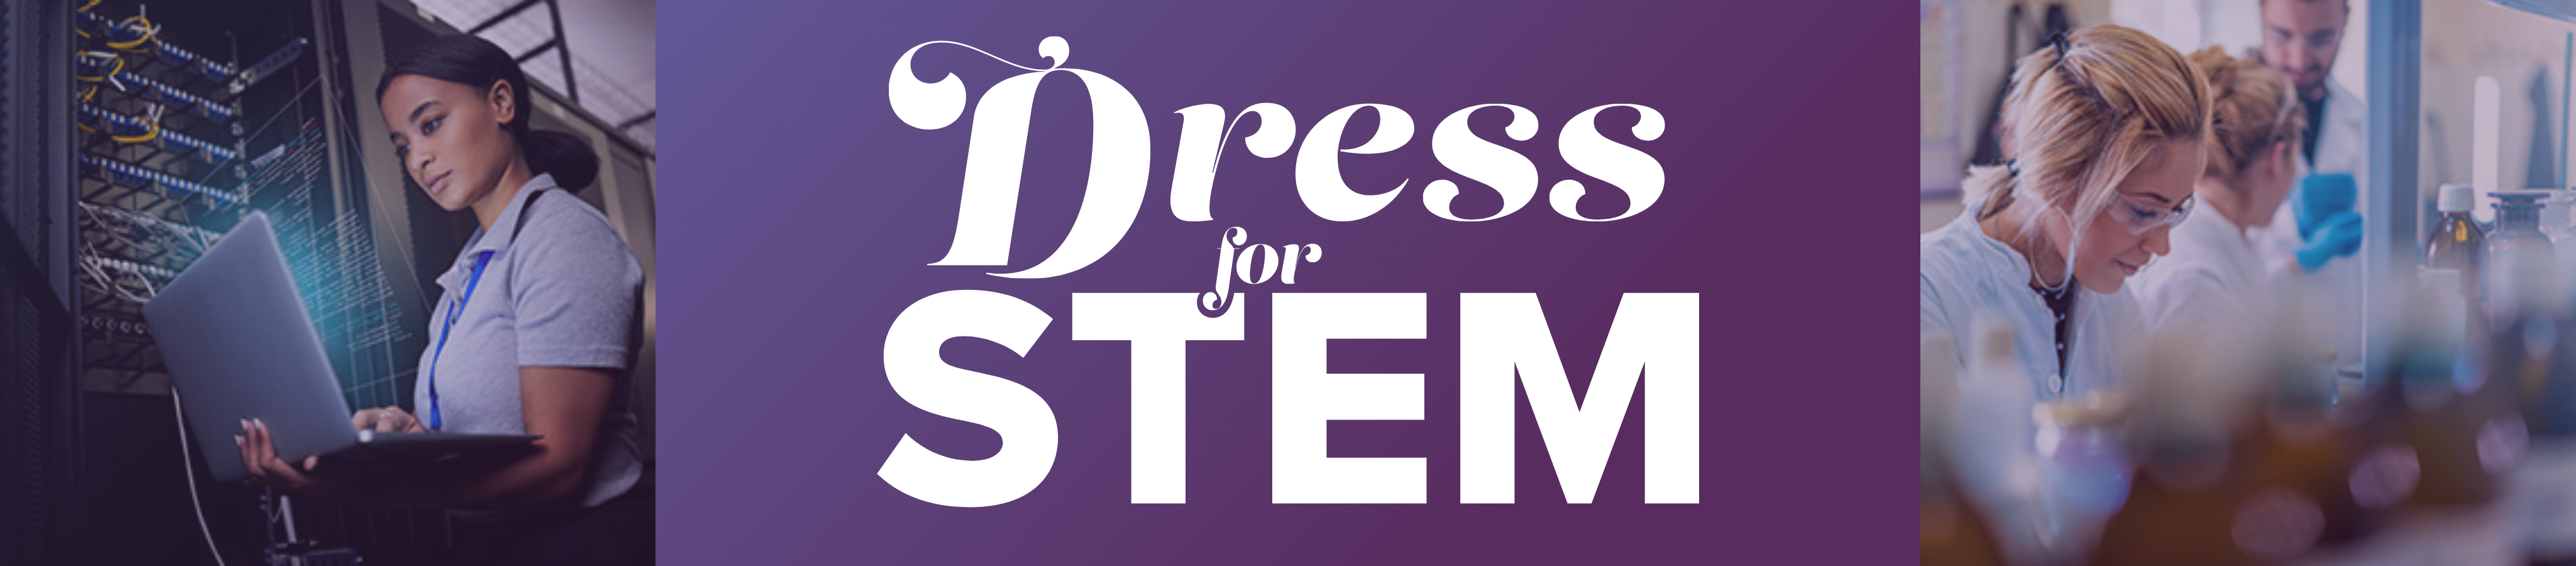 A graphic featuring two female STEM professionals as part of Dress for STEM